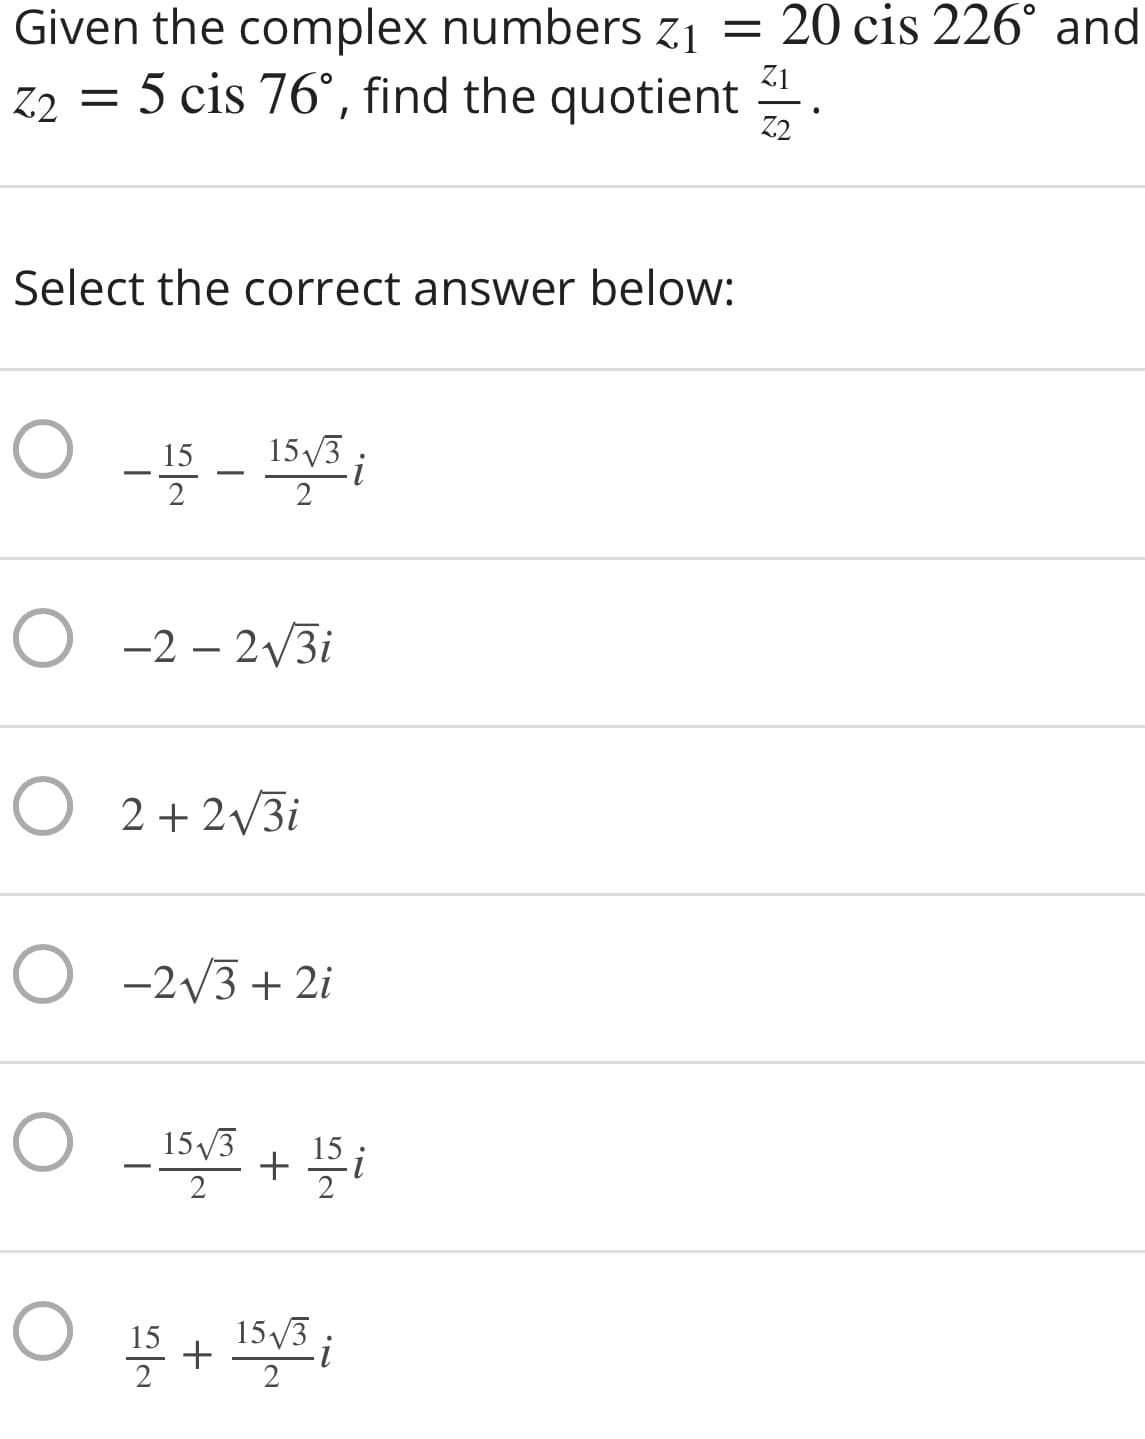 Given the complex numbers zj = 20 cis 226° and
5 cis 76°, find the quotient
Z1
Z2 =
Z2
Select the correct answer below:
15
153
2
O -2 – 2/3i
O 2+ 2/3i
O -2V3 + 2i
15/3
15
15
15/3
2
